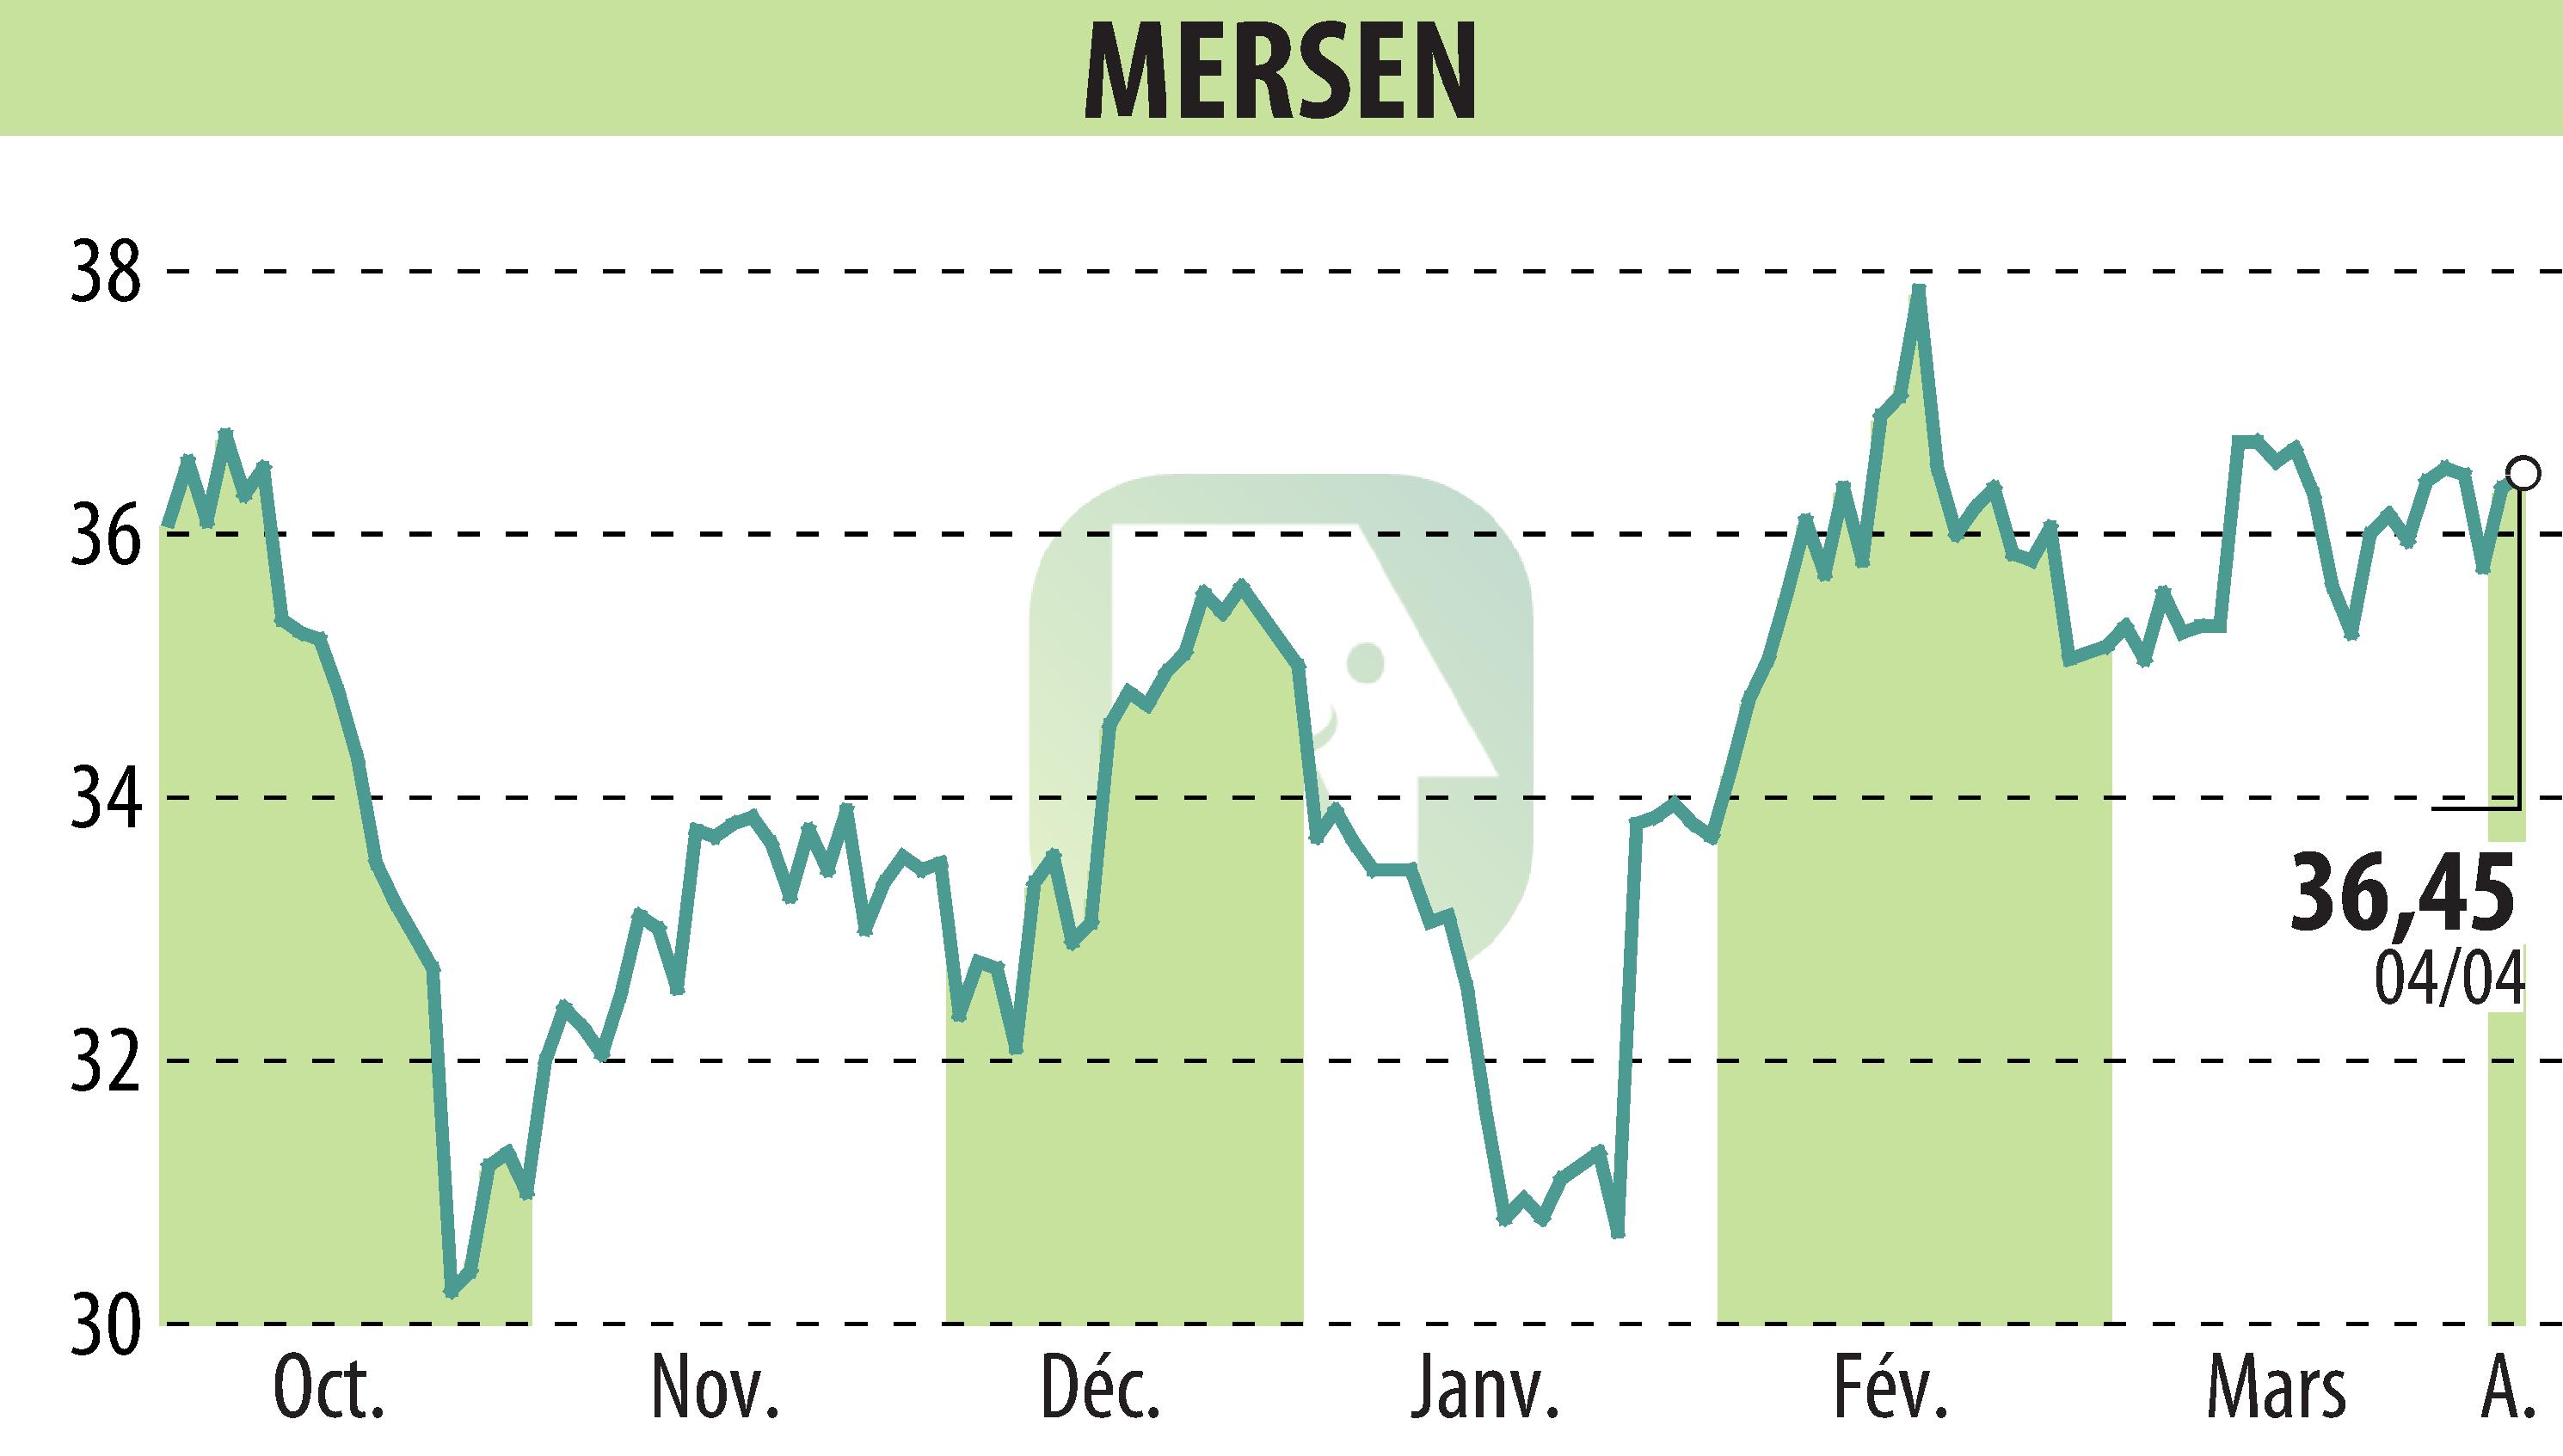 Stock price chart of MERSEN (EPA:MRN) showing fluctuations.